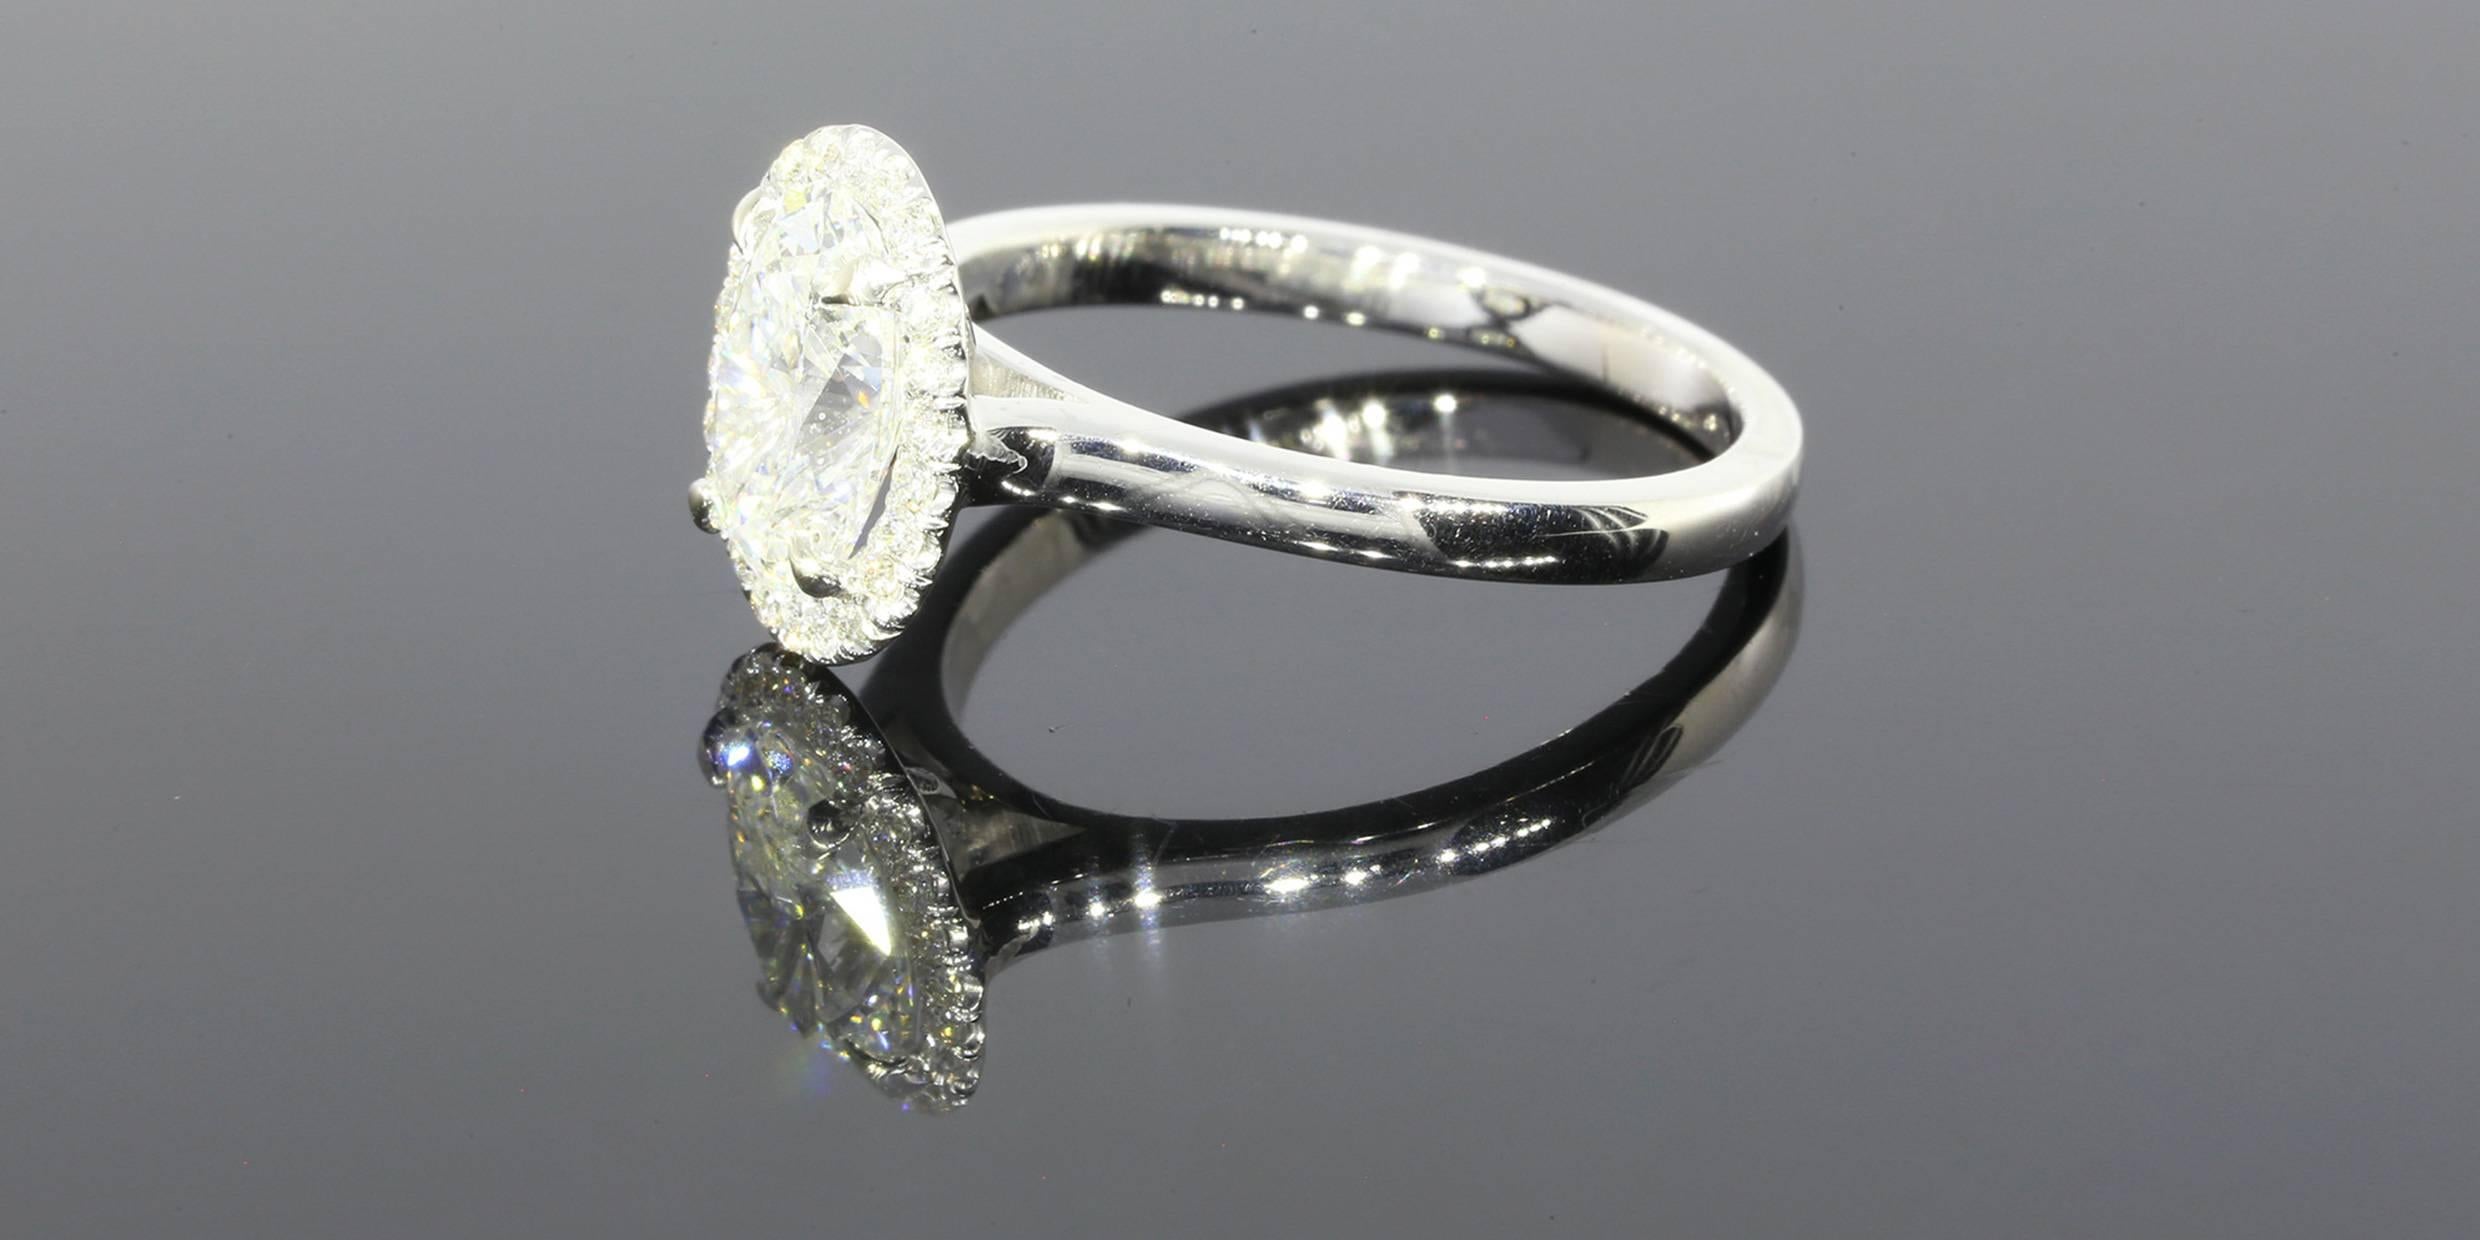 The ring features one brilliant cut oval center diamond weighing 1.41 carats. The diamond has a GIA lab report, number 6147600273. The diamond is an E/VS2 in quality. The diamond is set in a 14 karat white gold halo style mounting featuring round